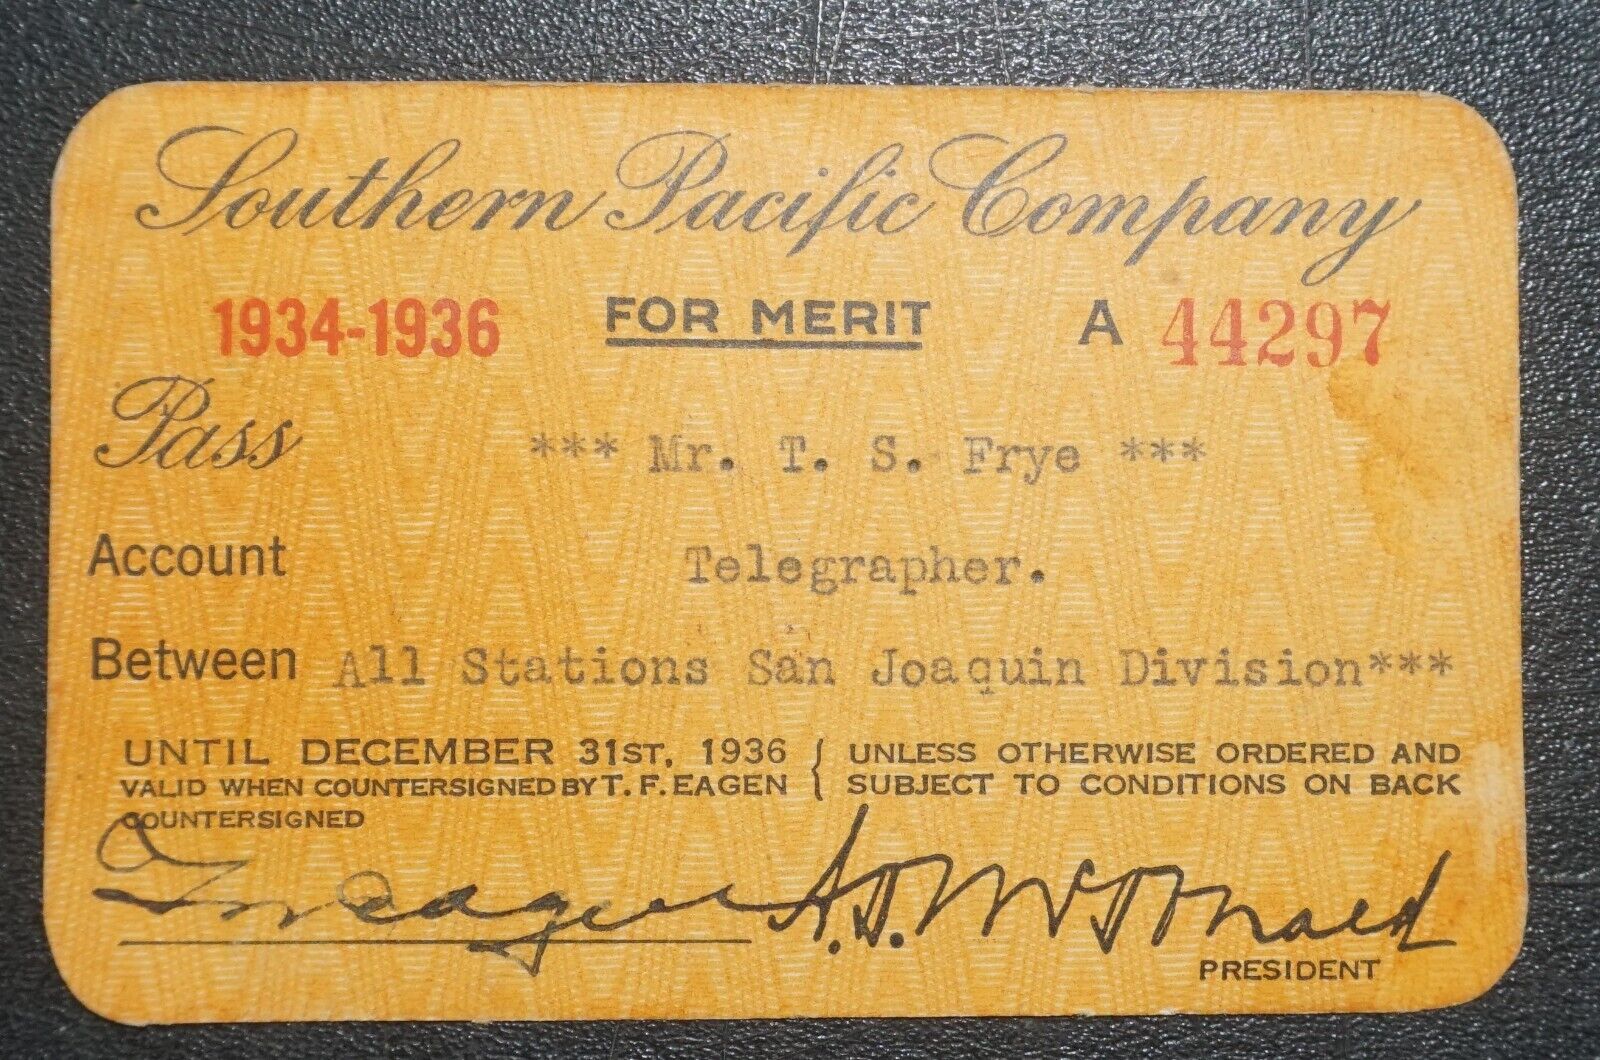 1934-1936 Southern Pacific Company RAILROAD RR TWO YEAR RAILWAY PASS (for Merit)